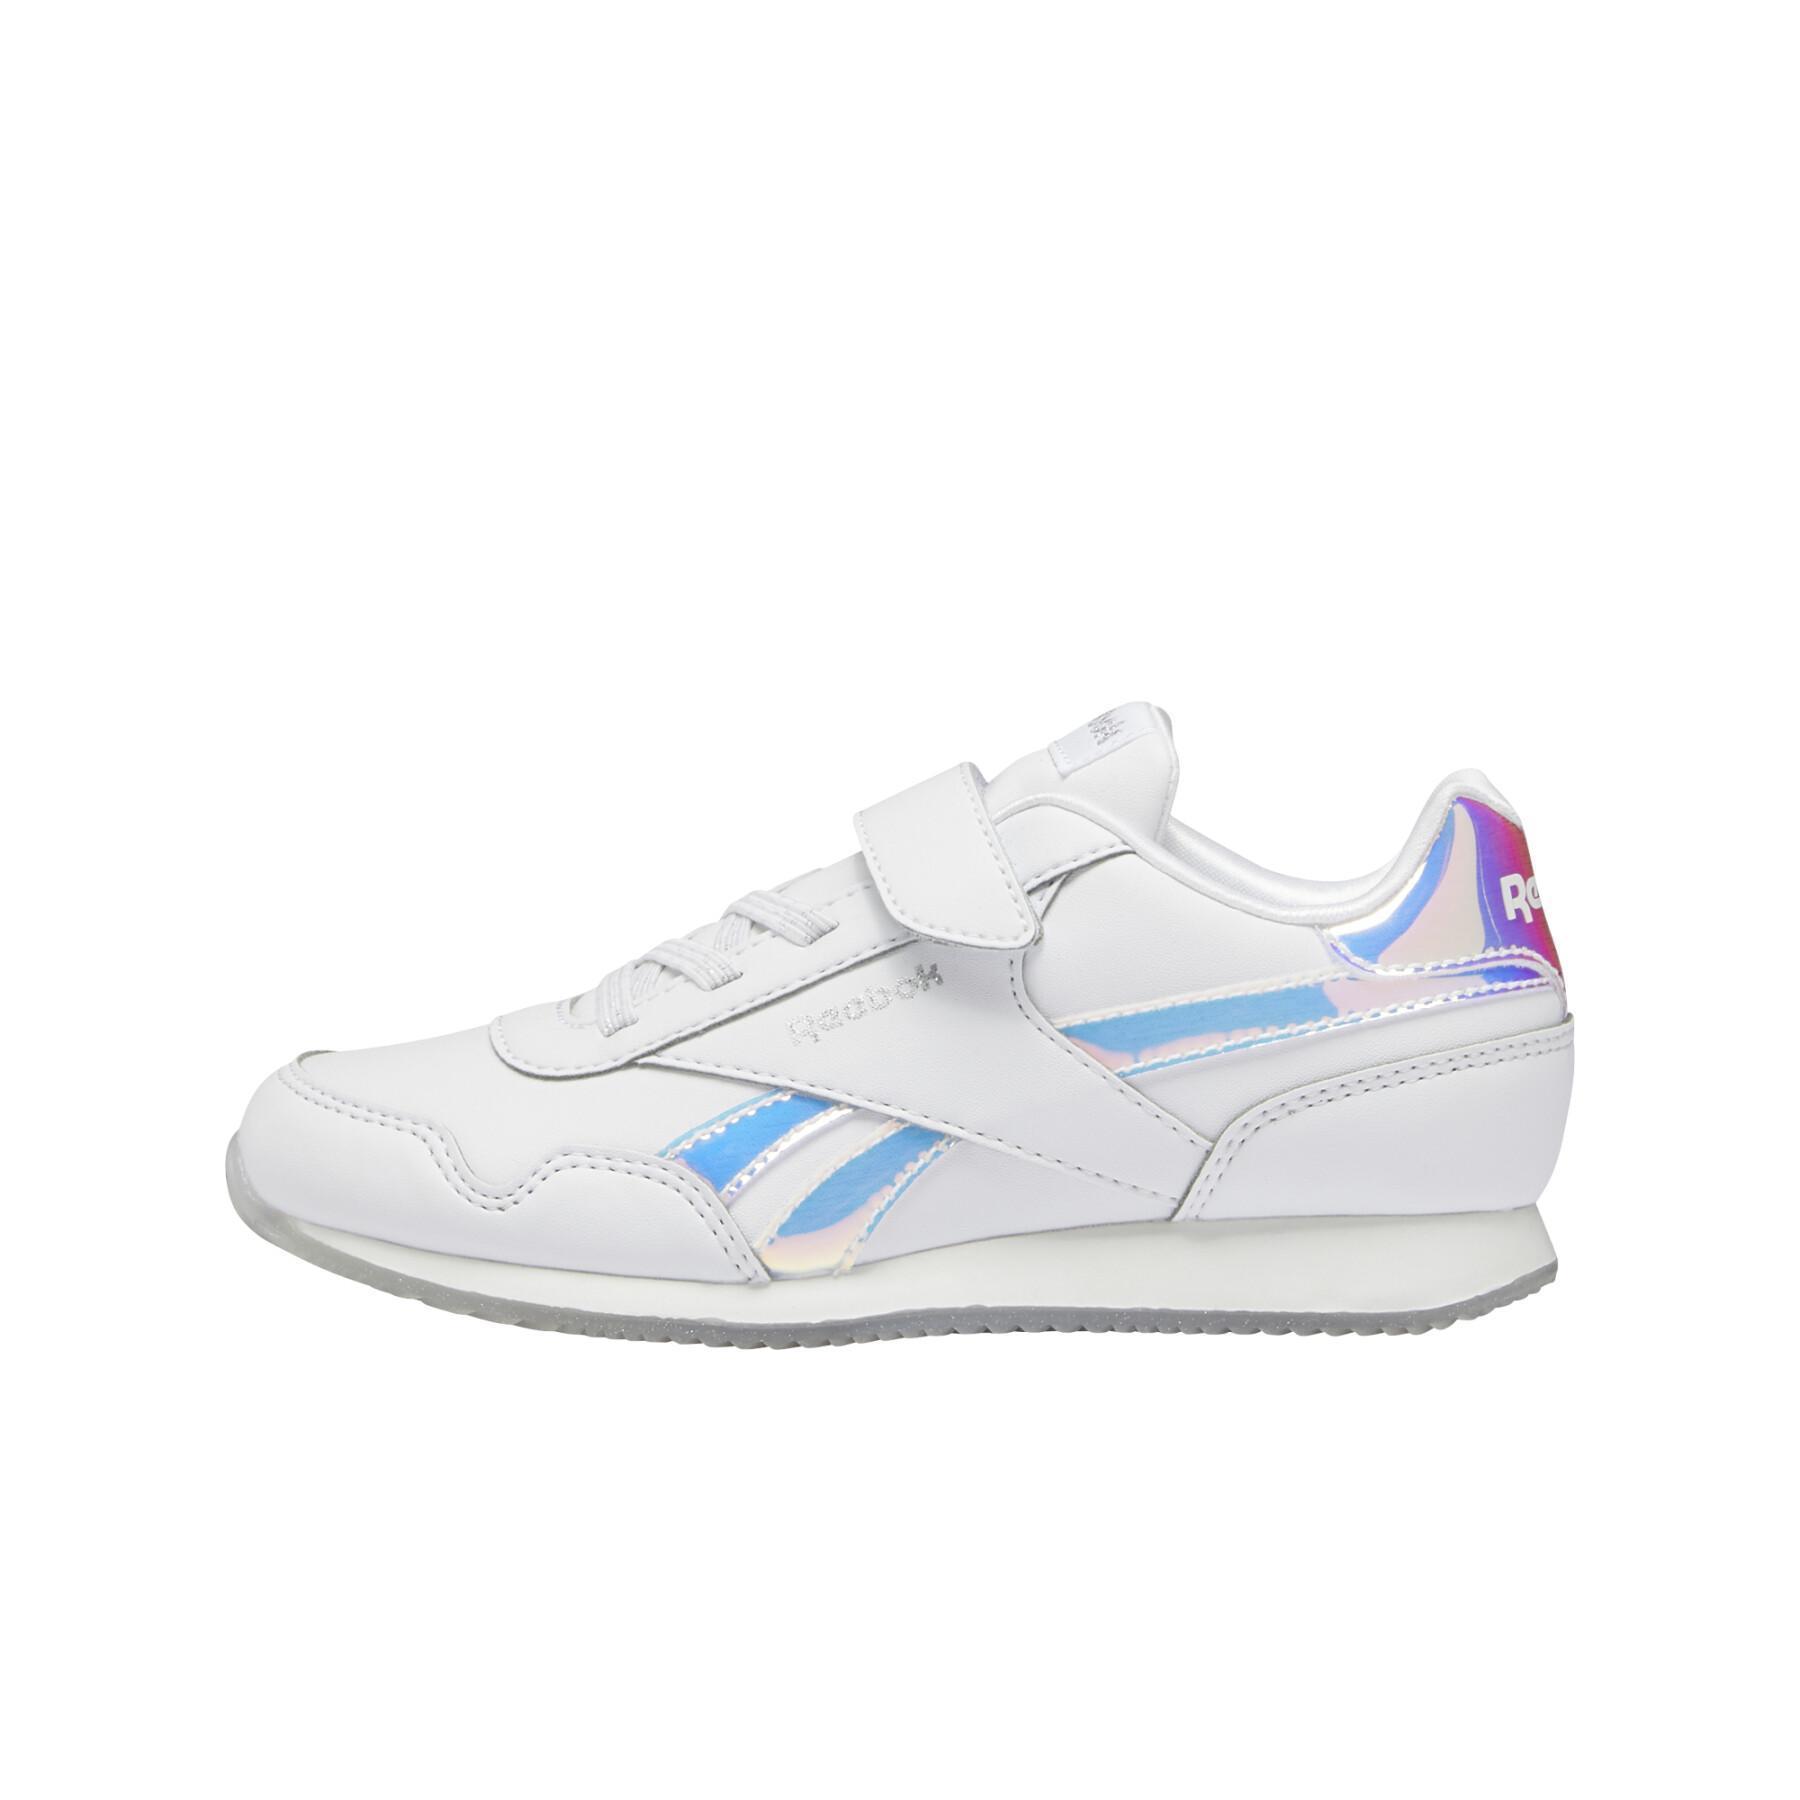 Chaussures fille Reebok Royal Jogger 3